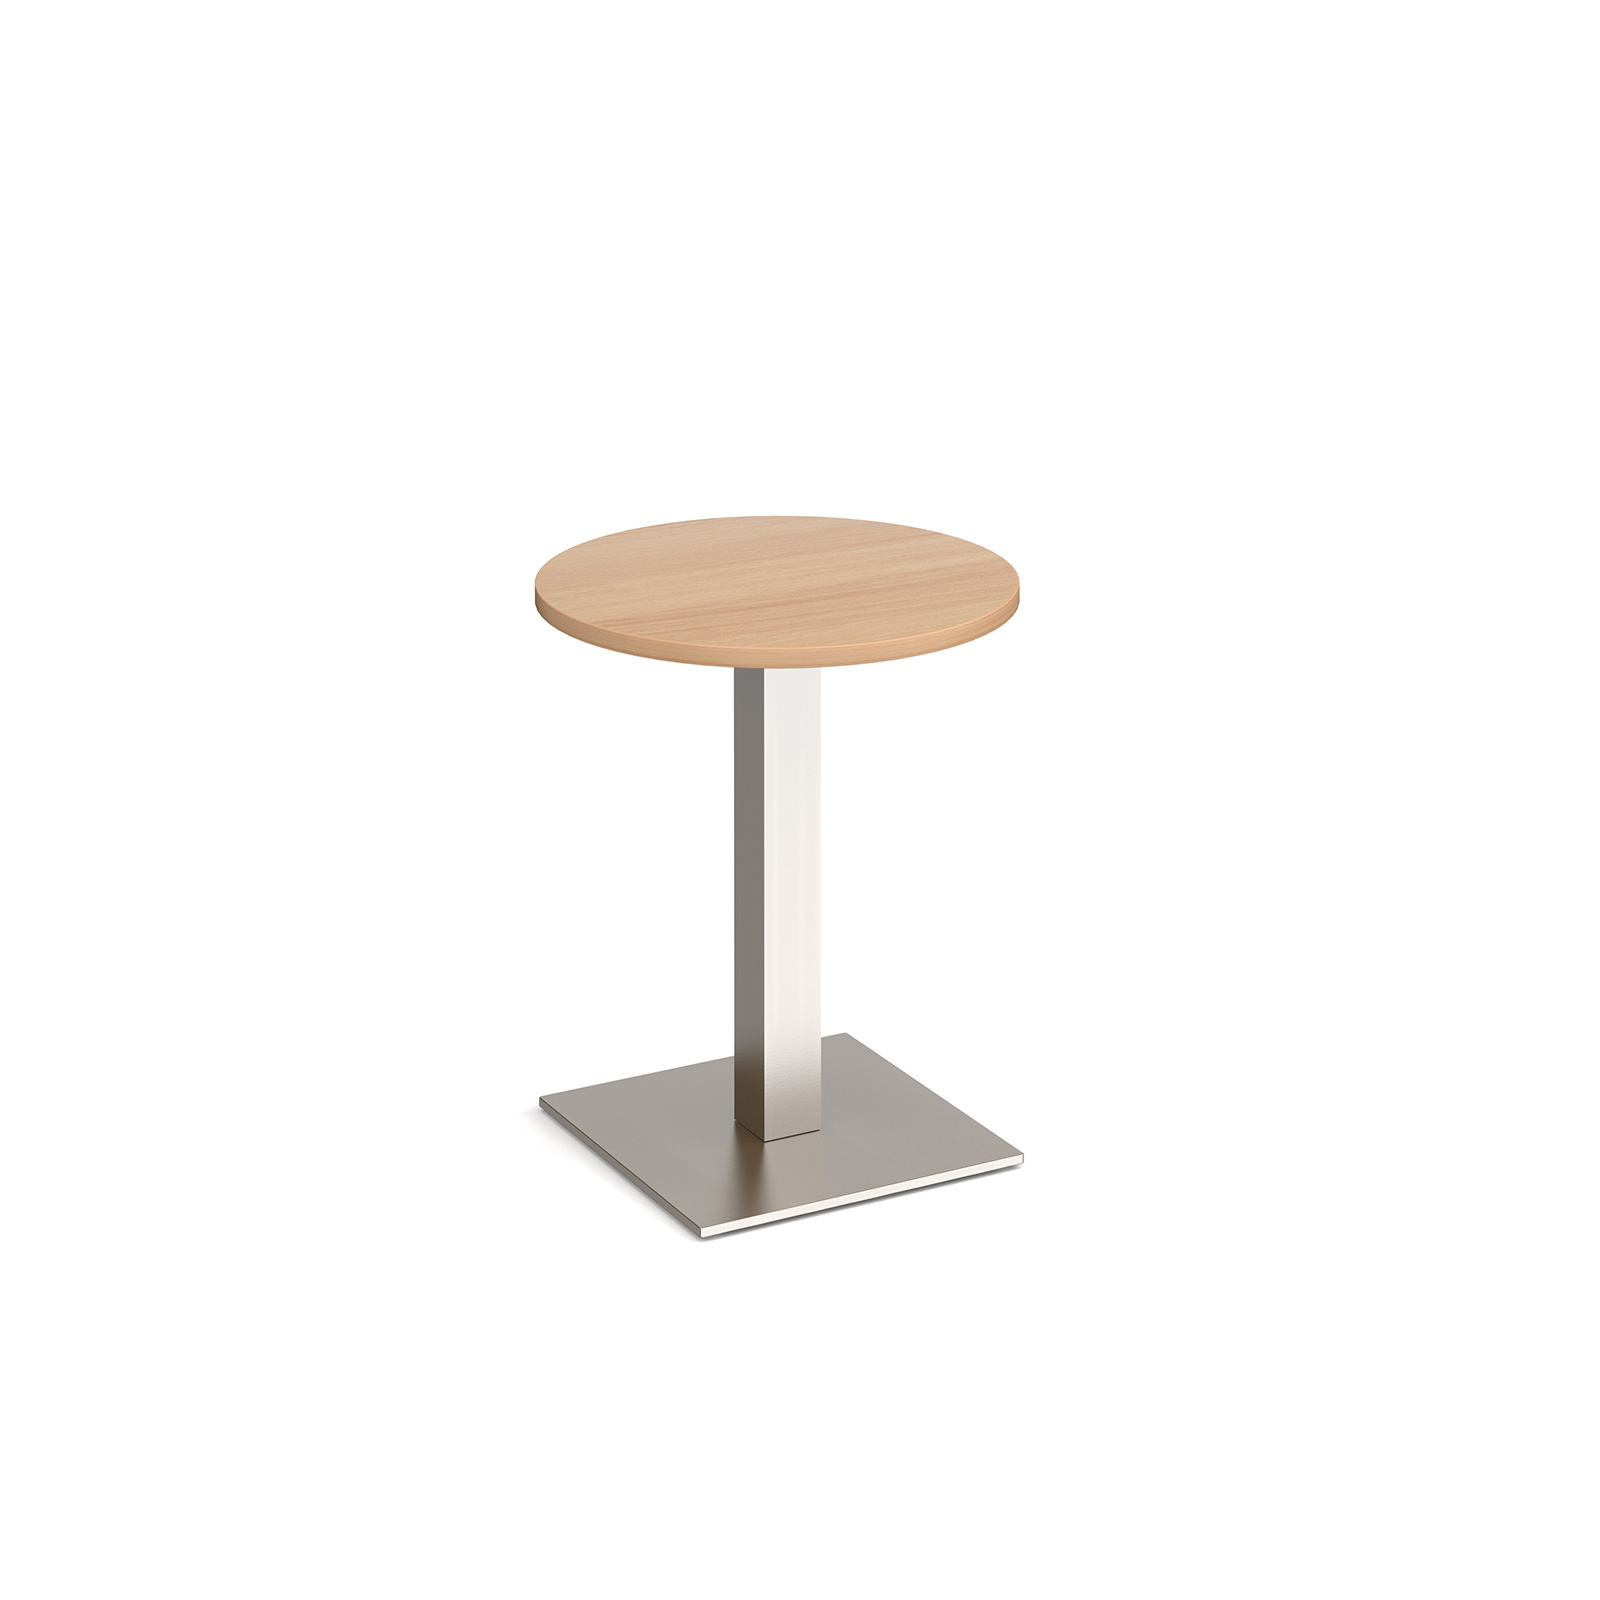 Brescia circular dining table with flat square brushed steel base 600mm - beech